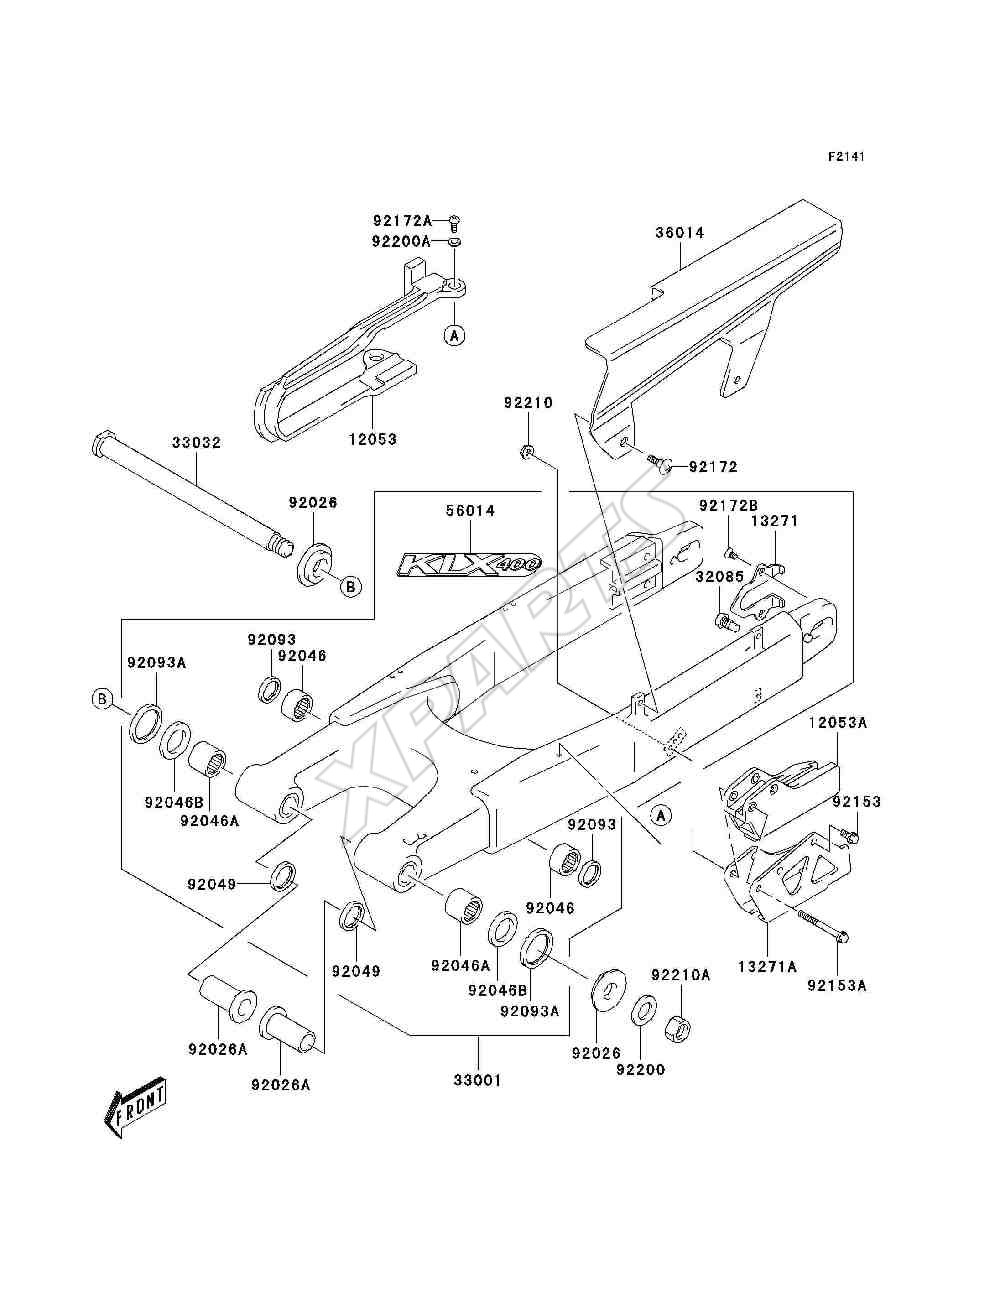 Picture for category Swingarm(KLX400-A1)